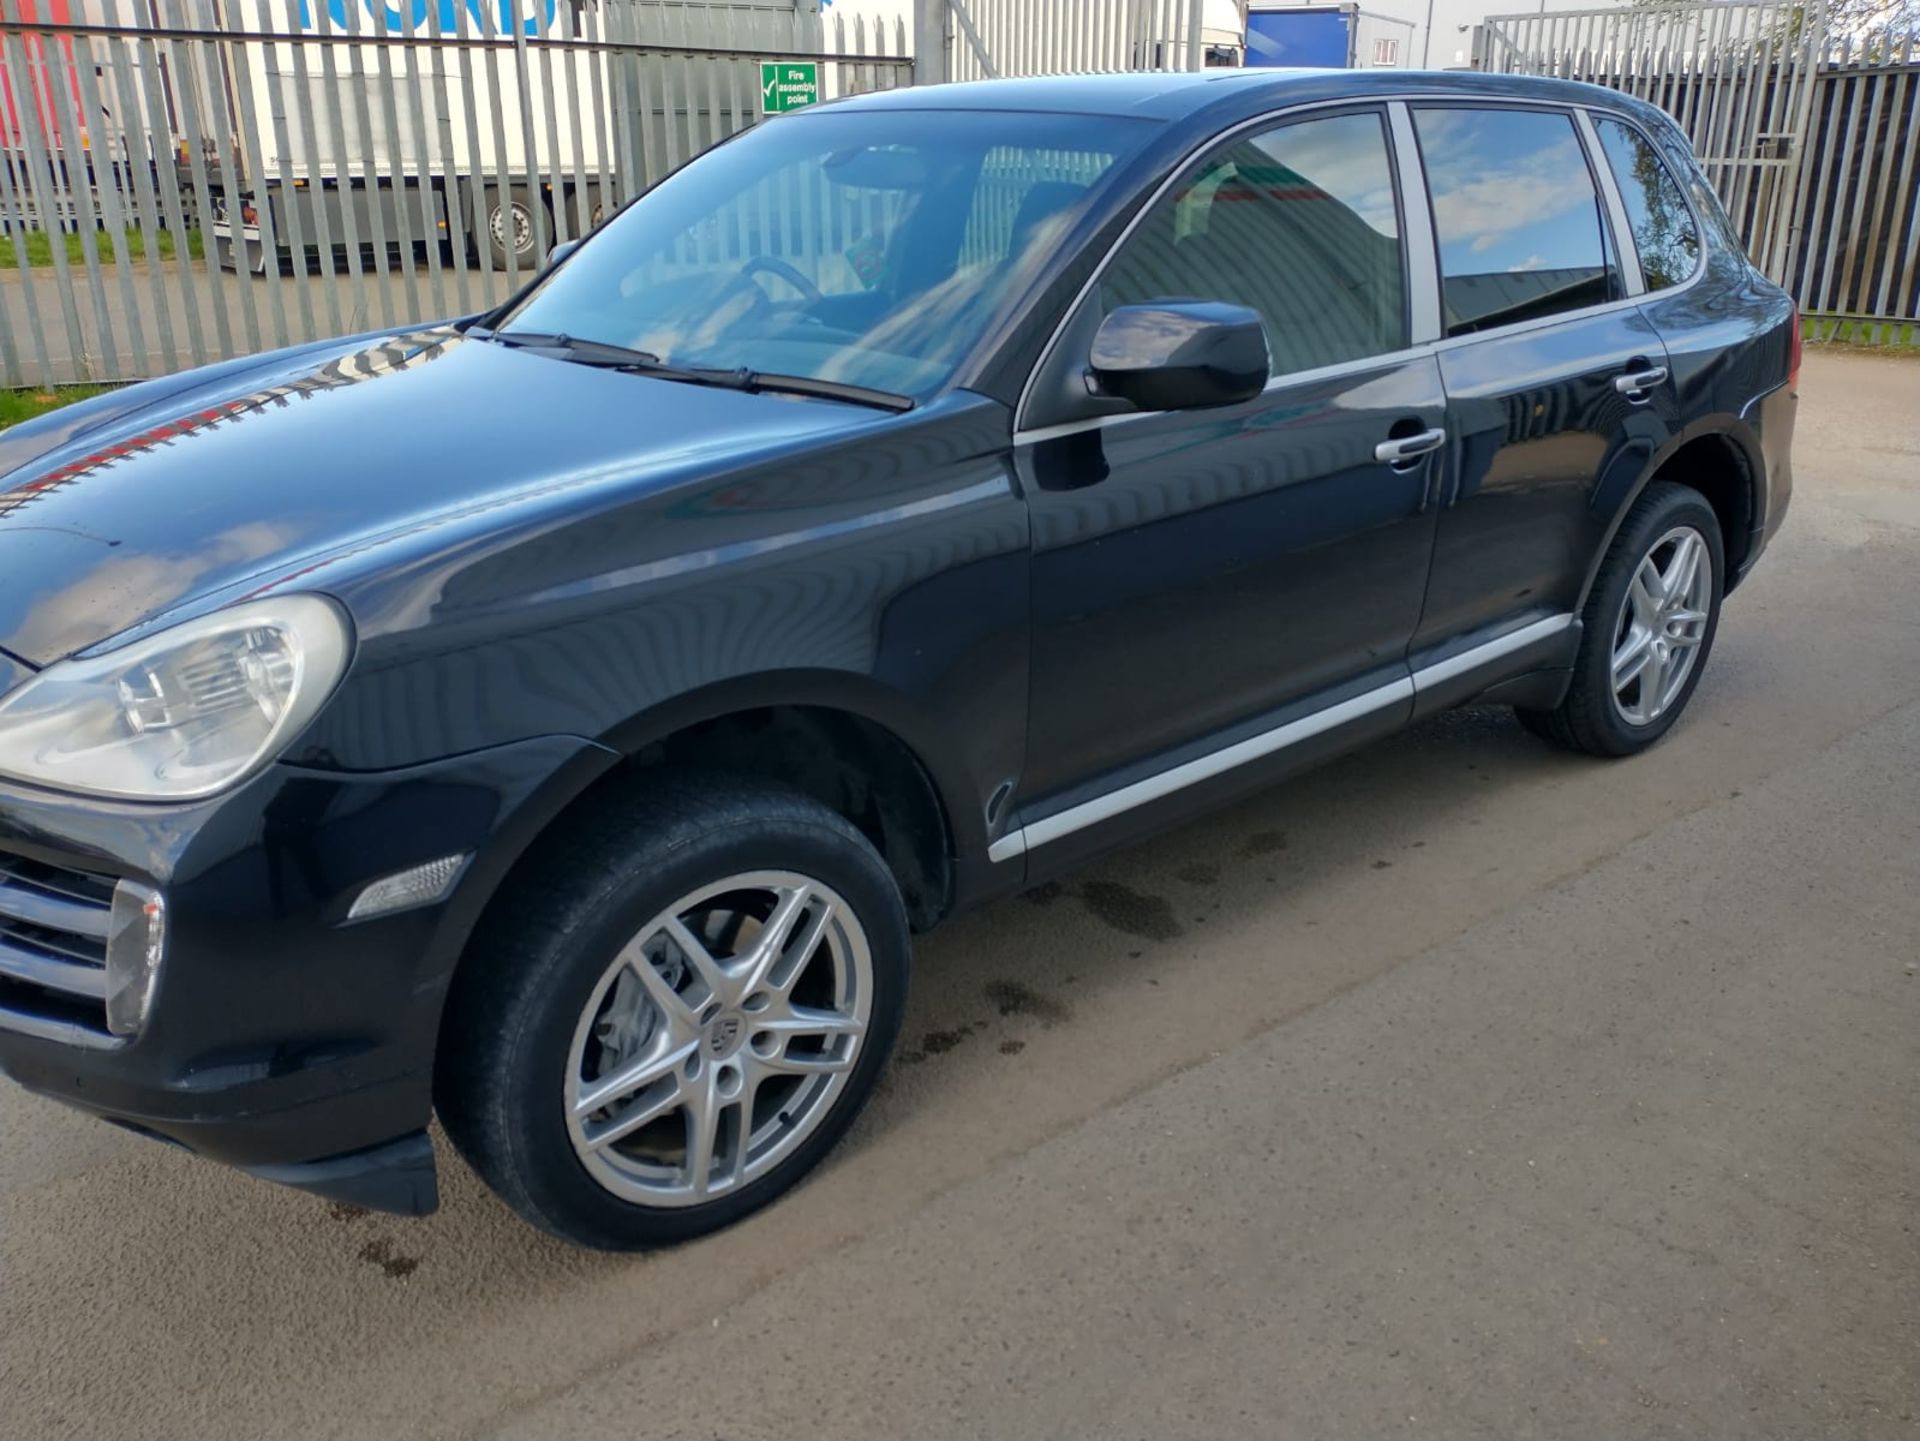 2008 Porsche Cayenne Tiptronic 3.6 5Dr SUV - CL505 - NO VAT ON THE HAMMER - Location: Corby, Northam - Image 3 of 16